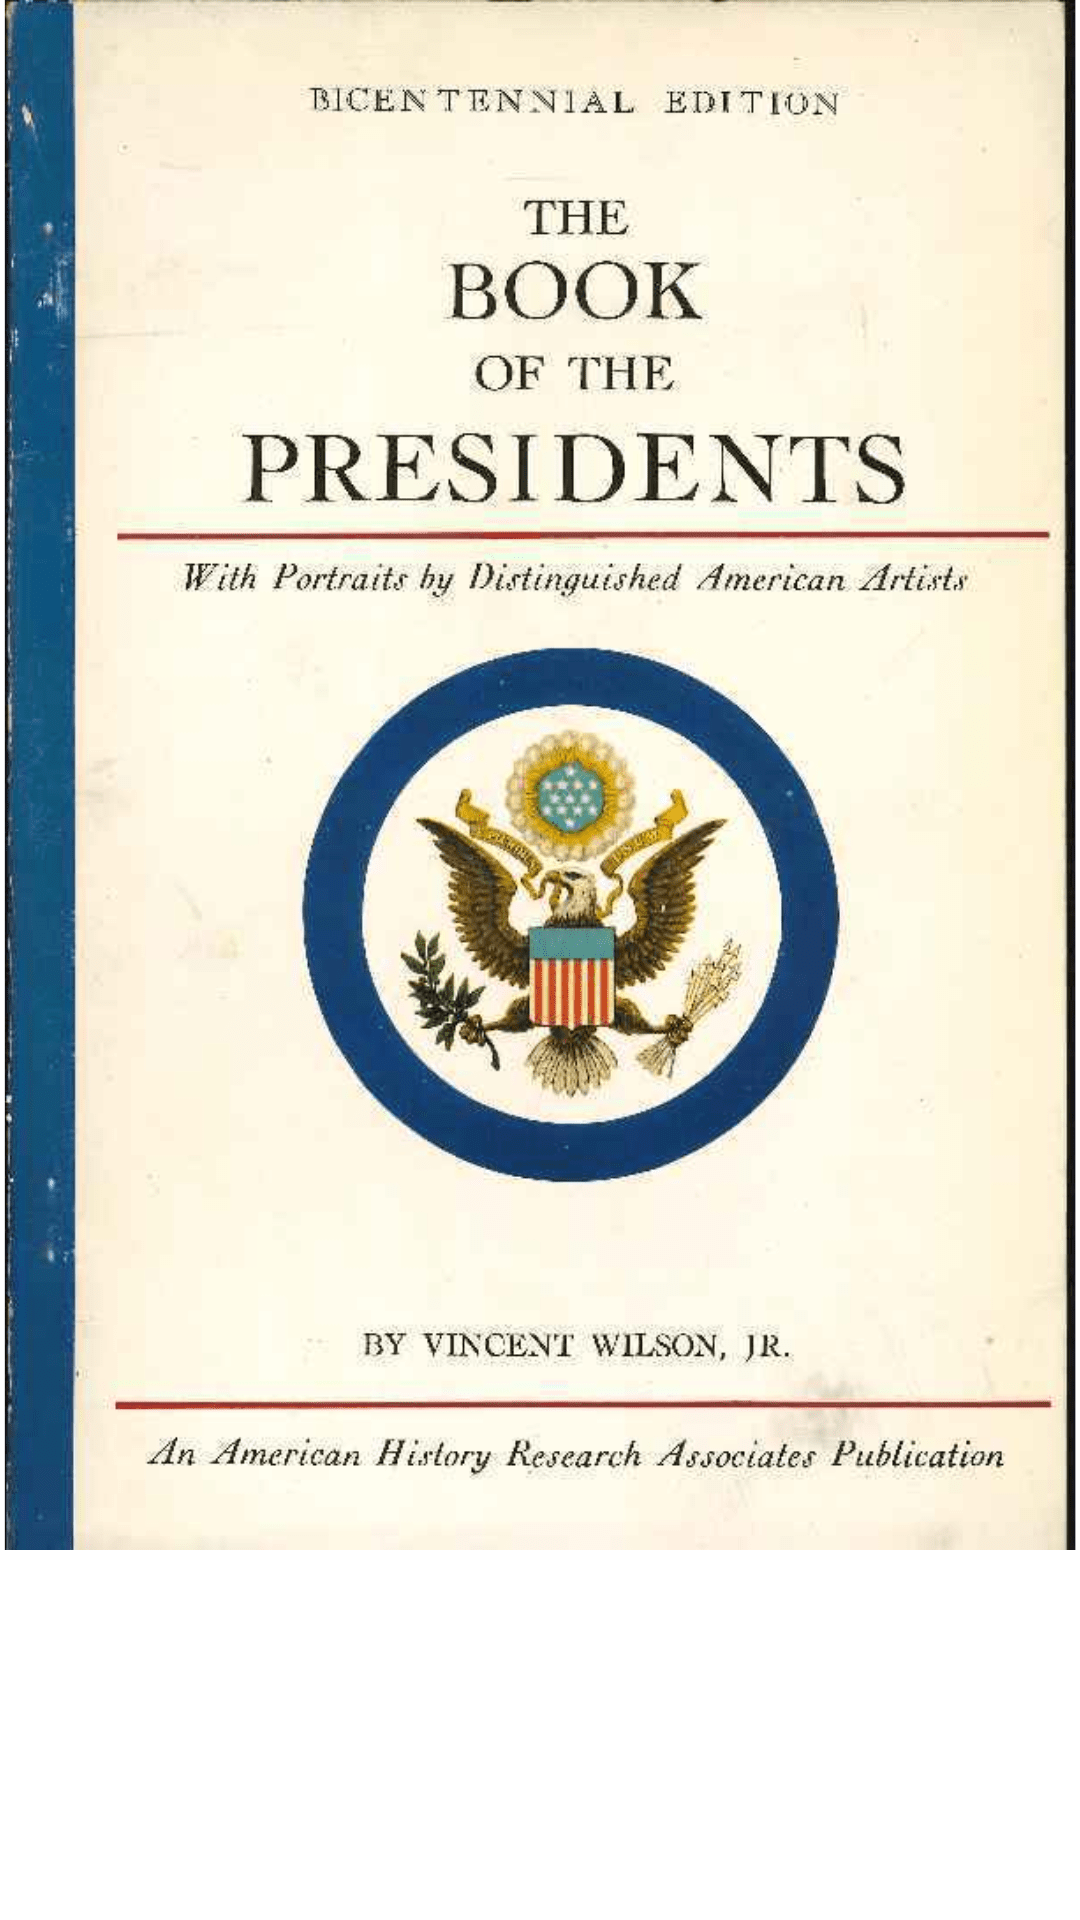 Book of the Presidents by Vincent Wilson